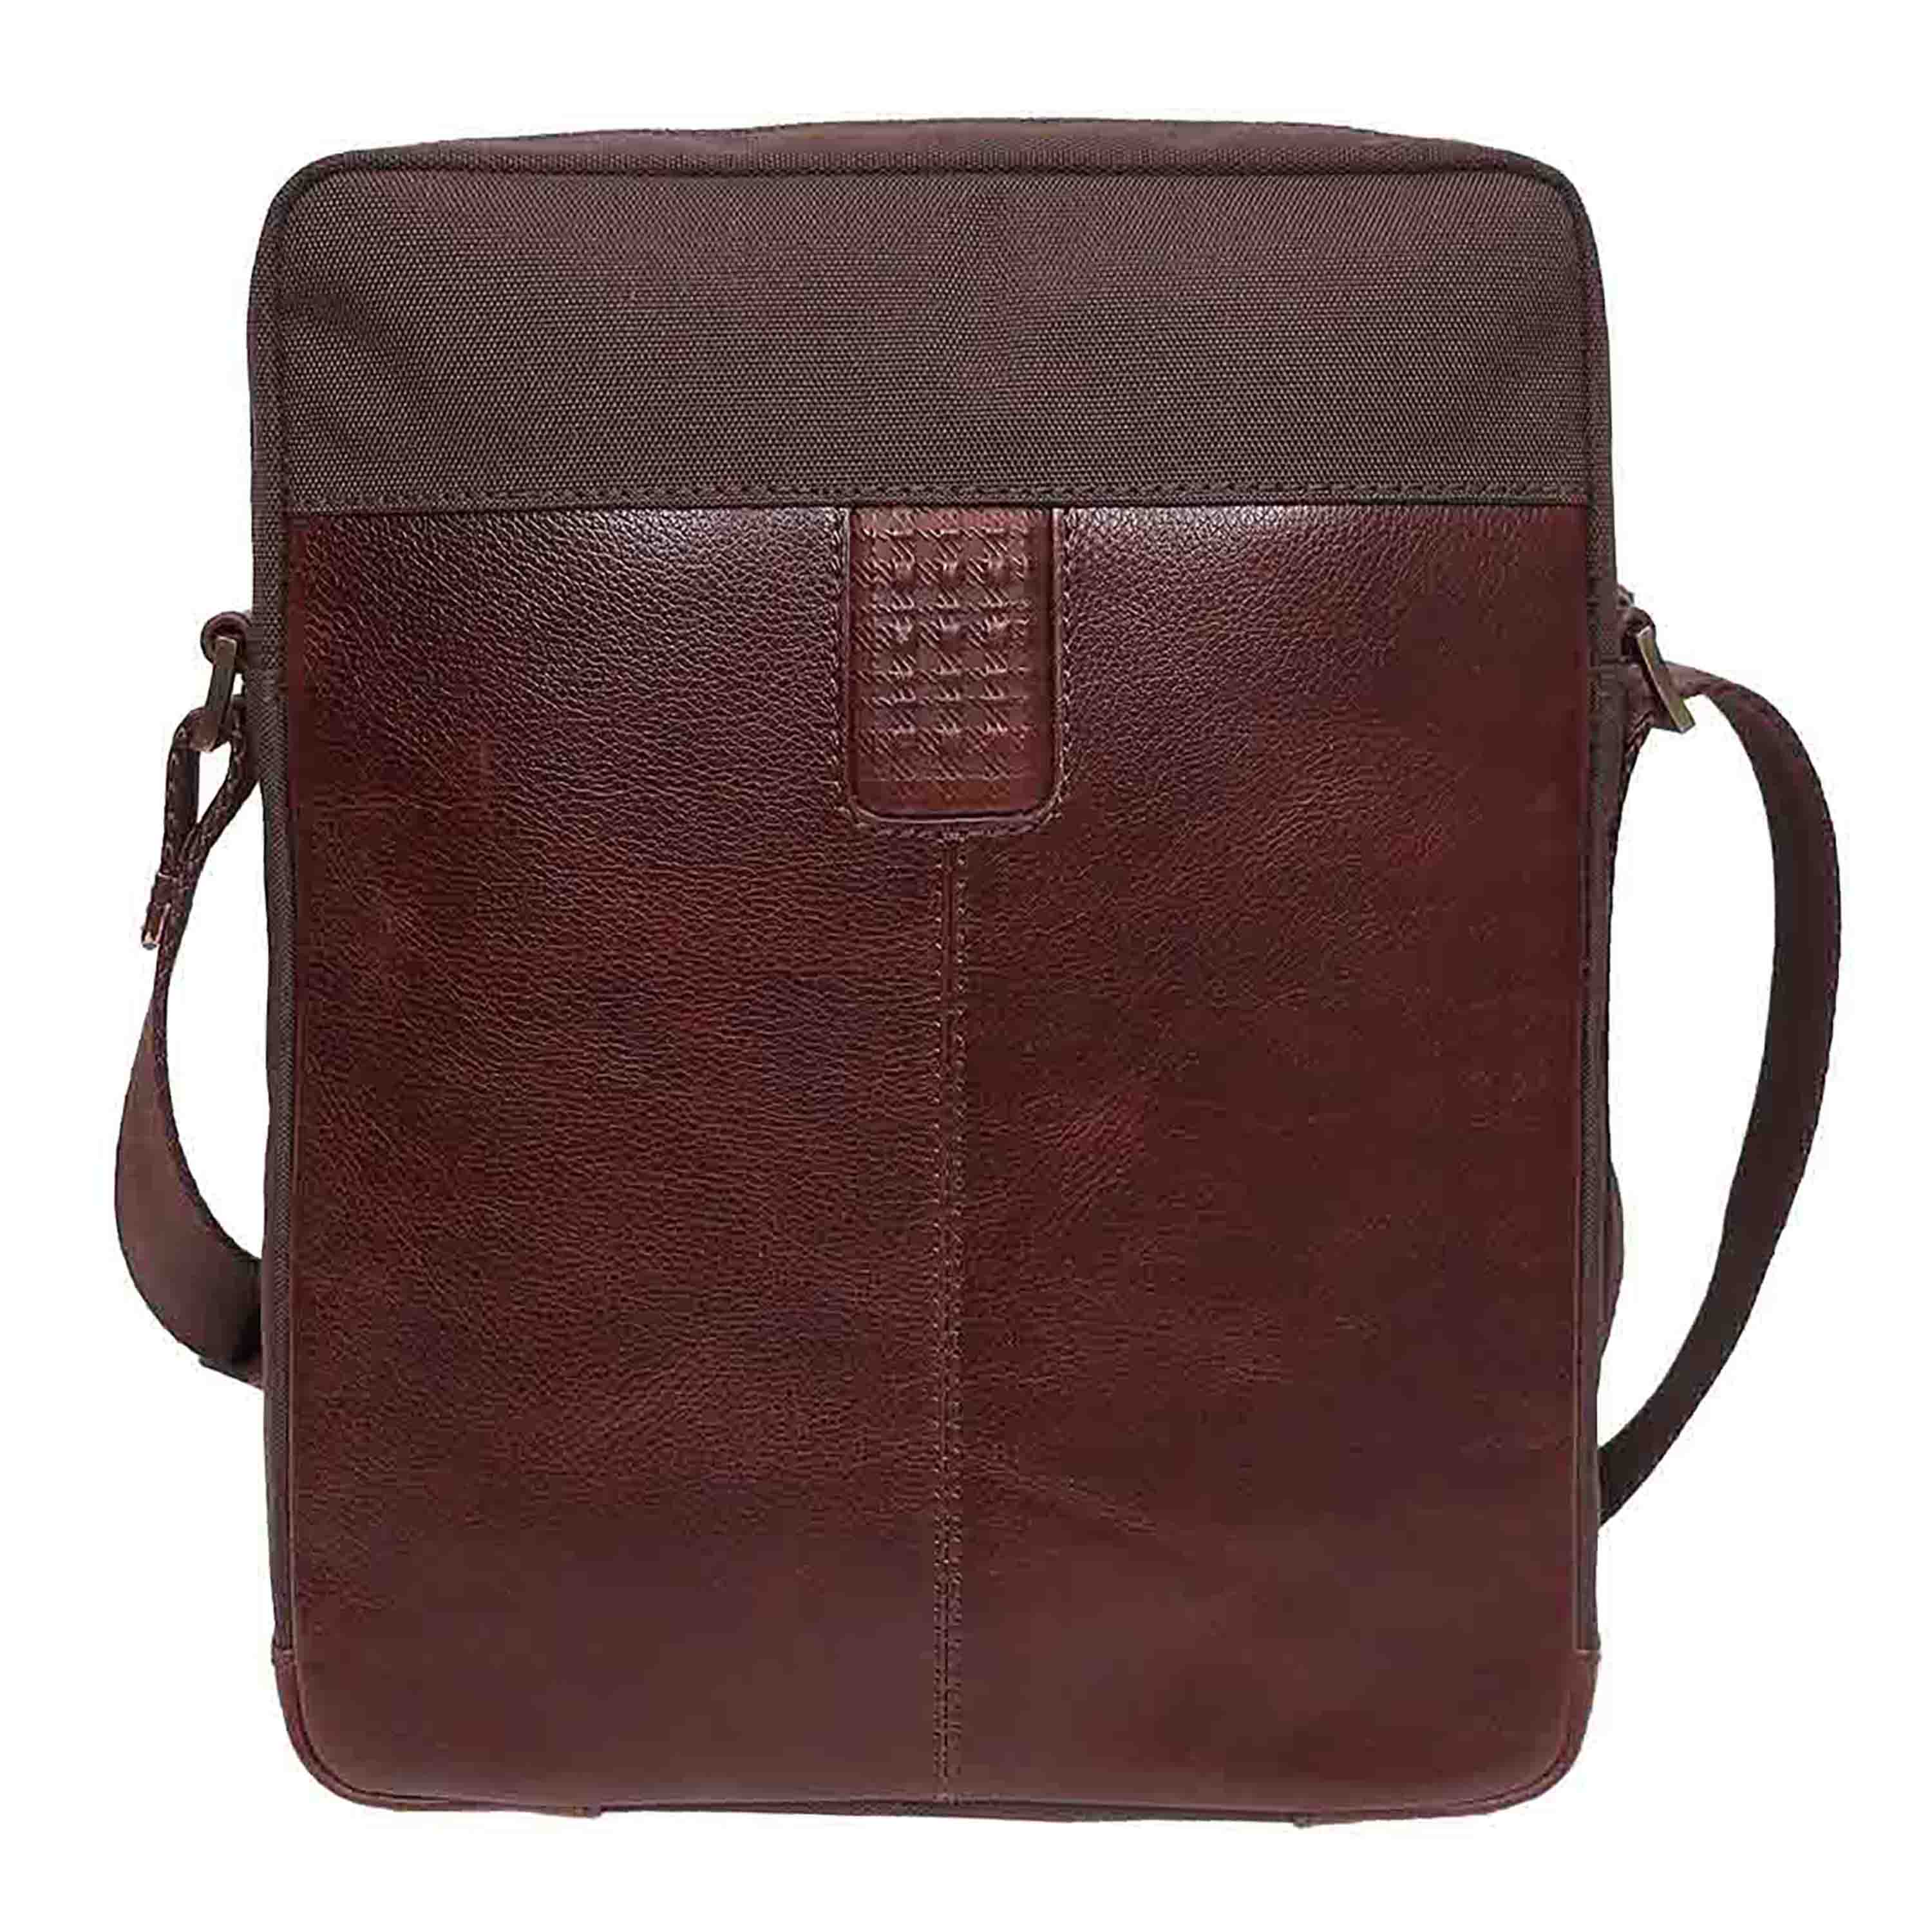 Vintage Brown Genuine Leather Small Camera Bag at Rs 900/piece in Jaipur |  ID: 11423495262